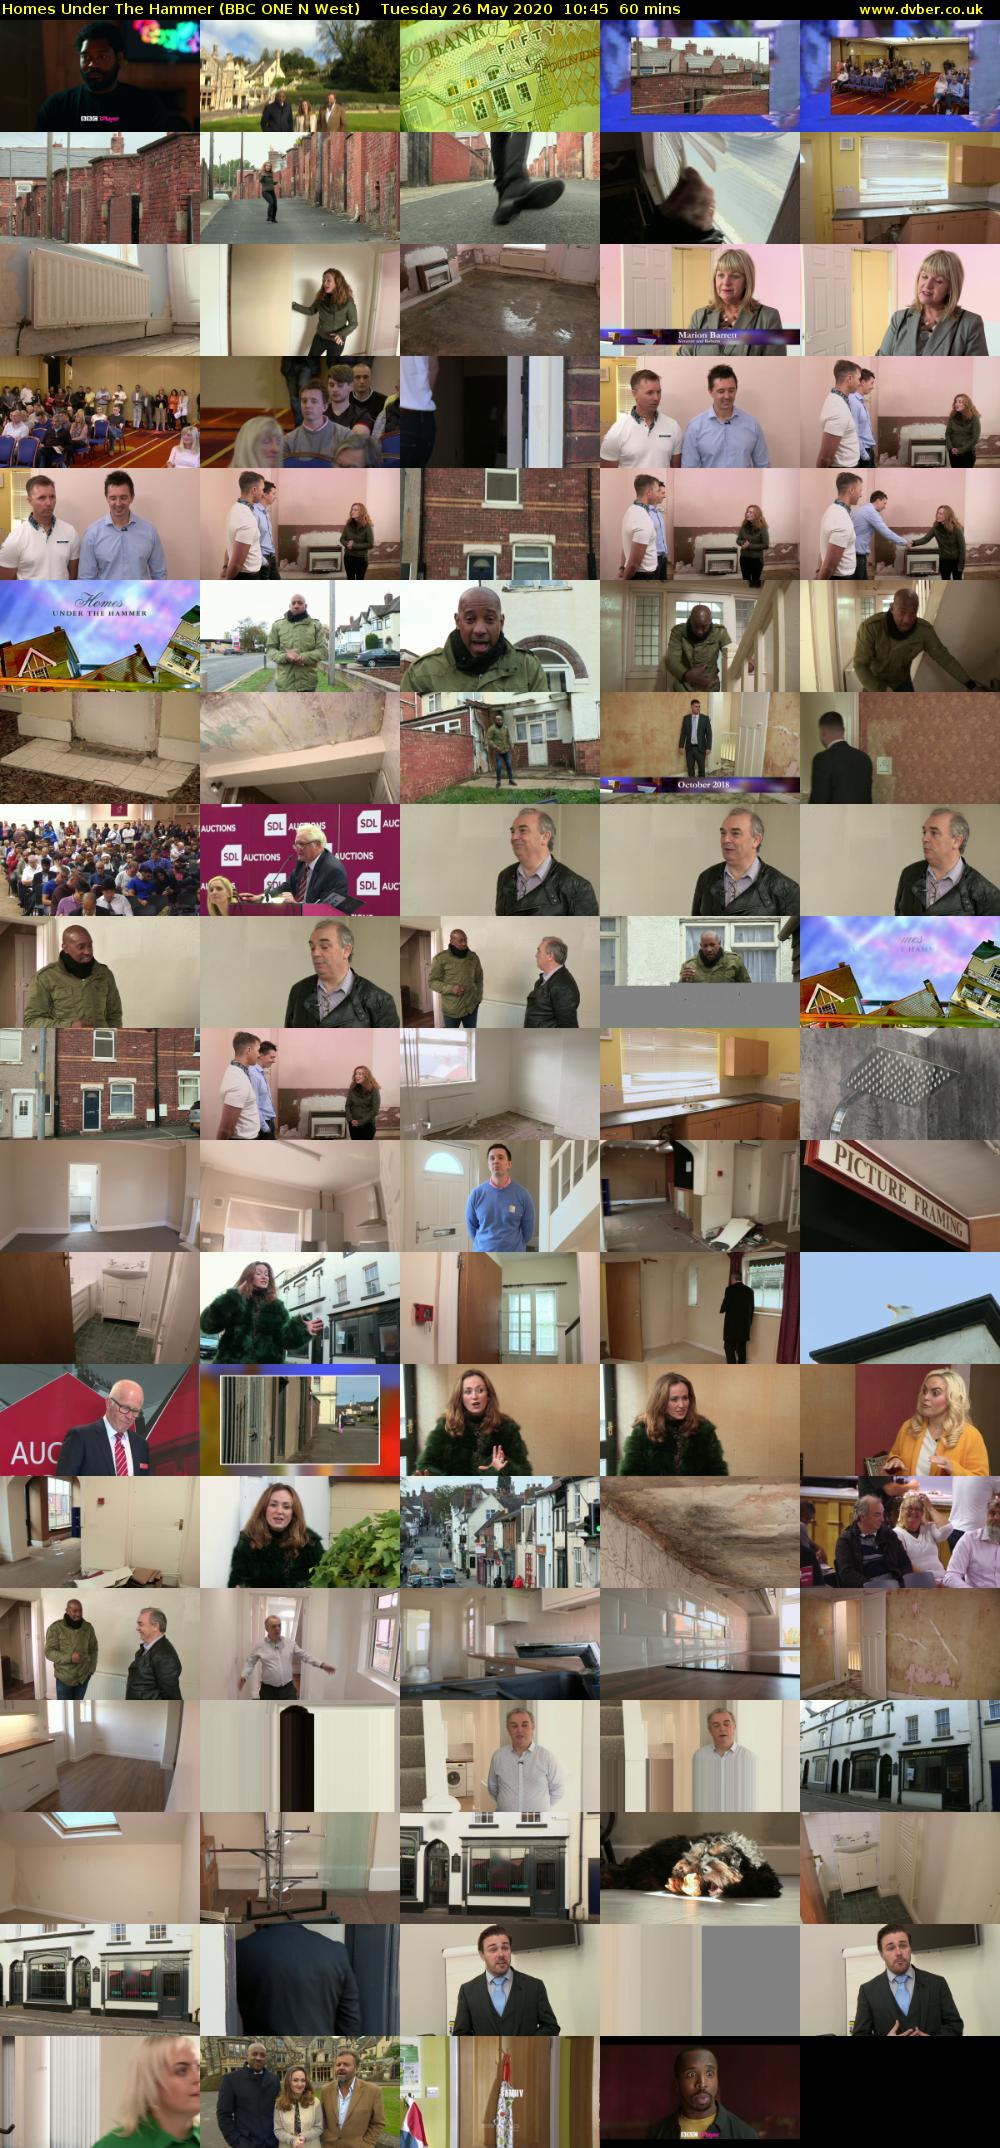 Homes Under The Hammer (BBC ONE N West) Tuesday 26 May 2020 10:45 - 11:45